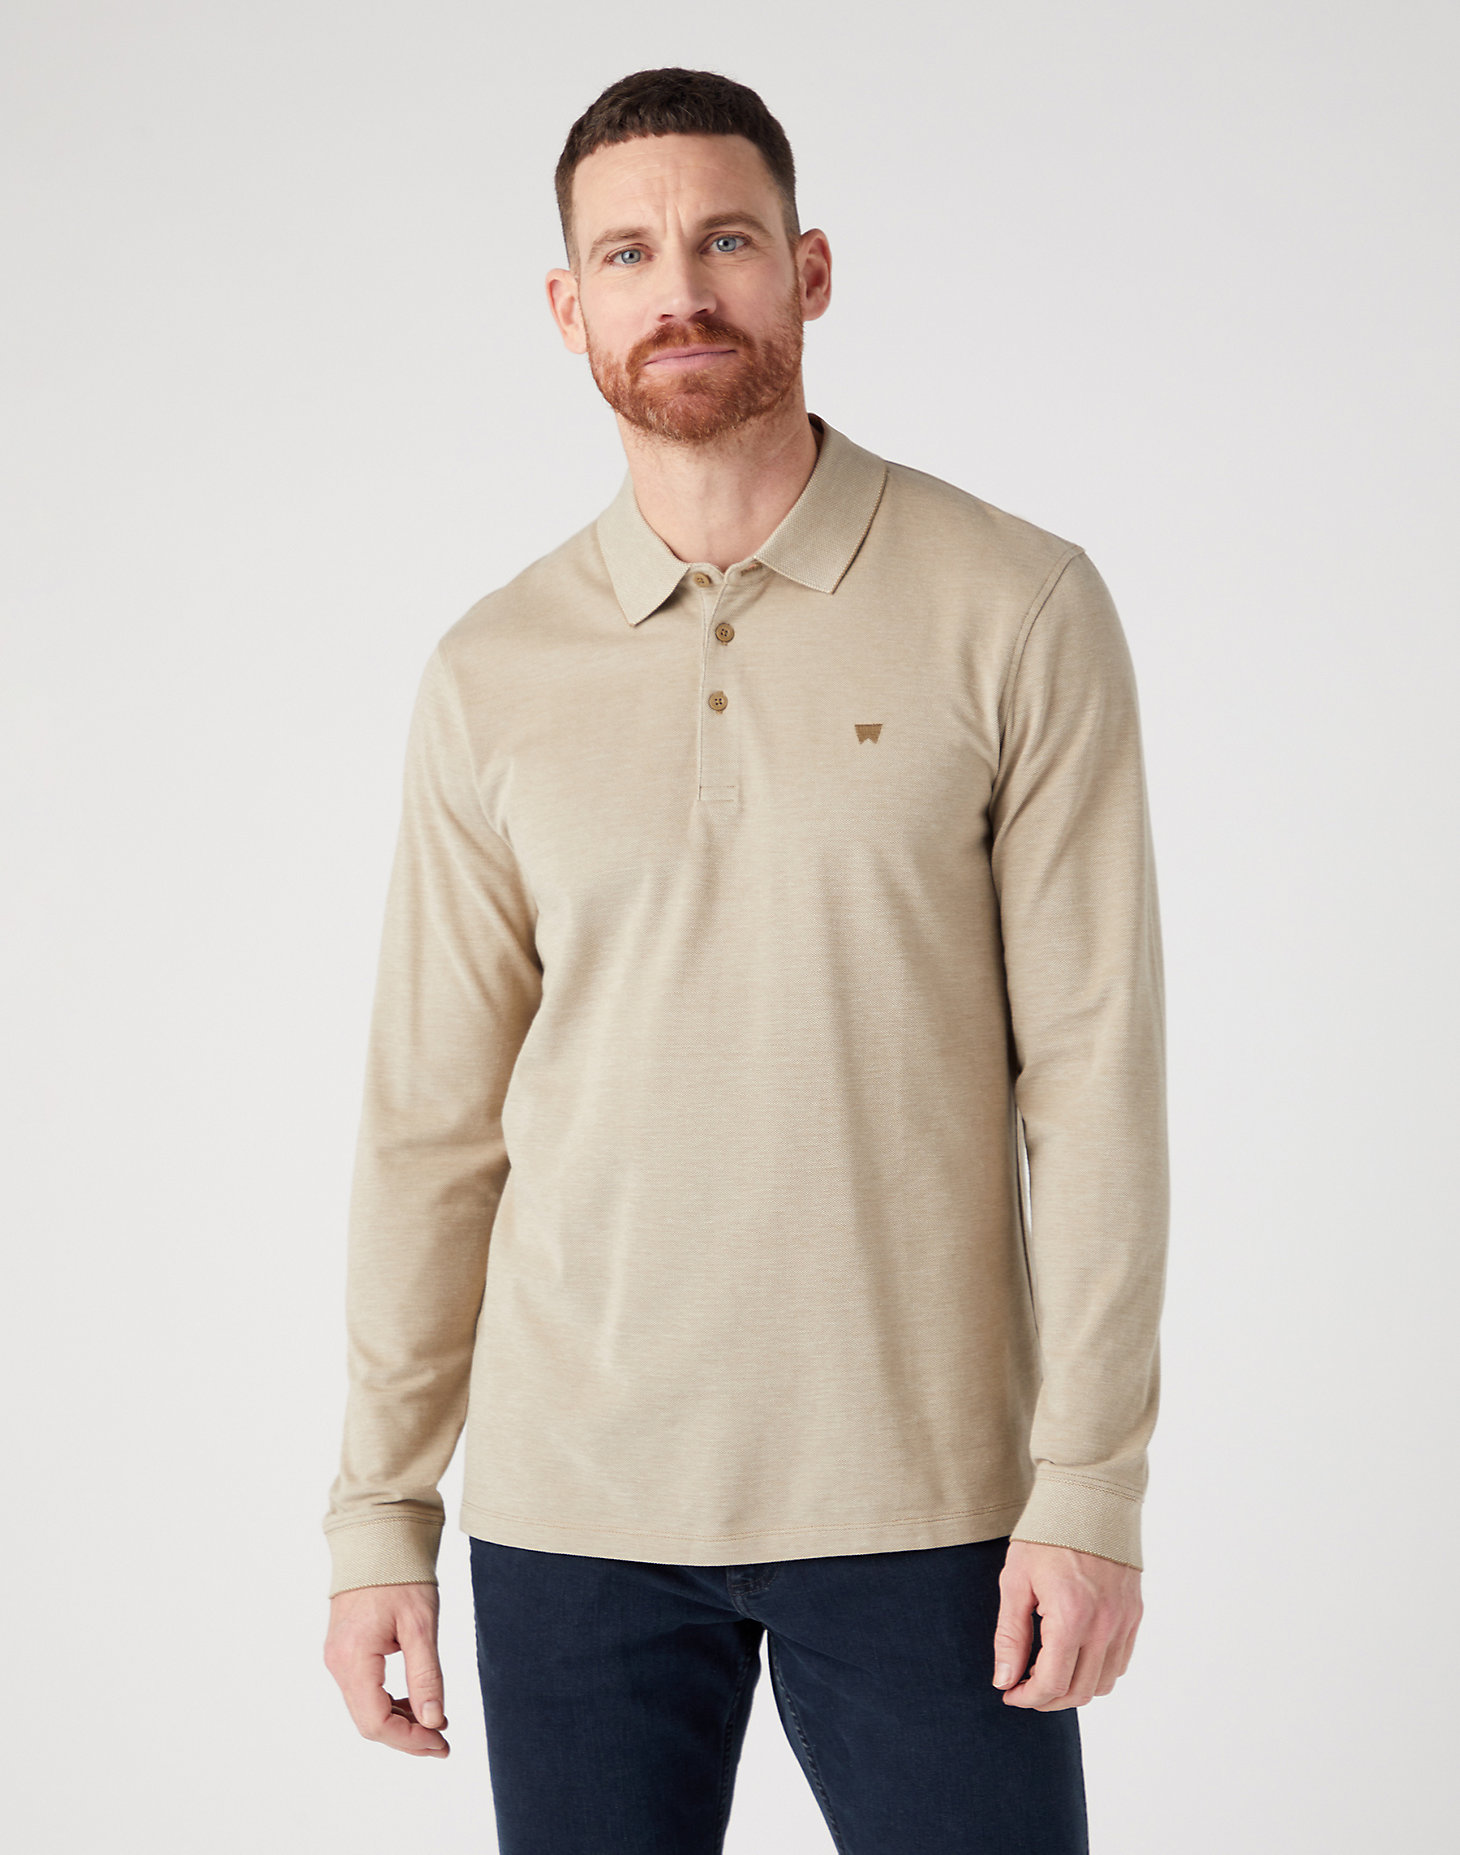 Long Sleeve Refined Polo in Lead Grey main view